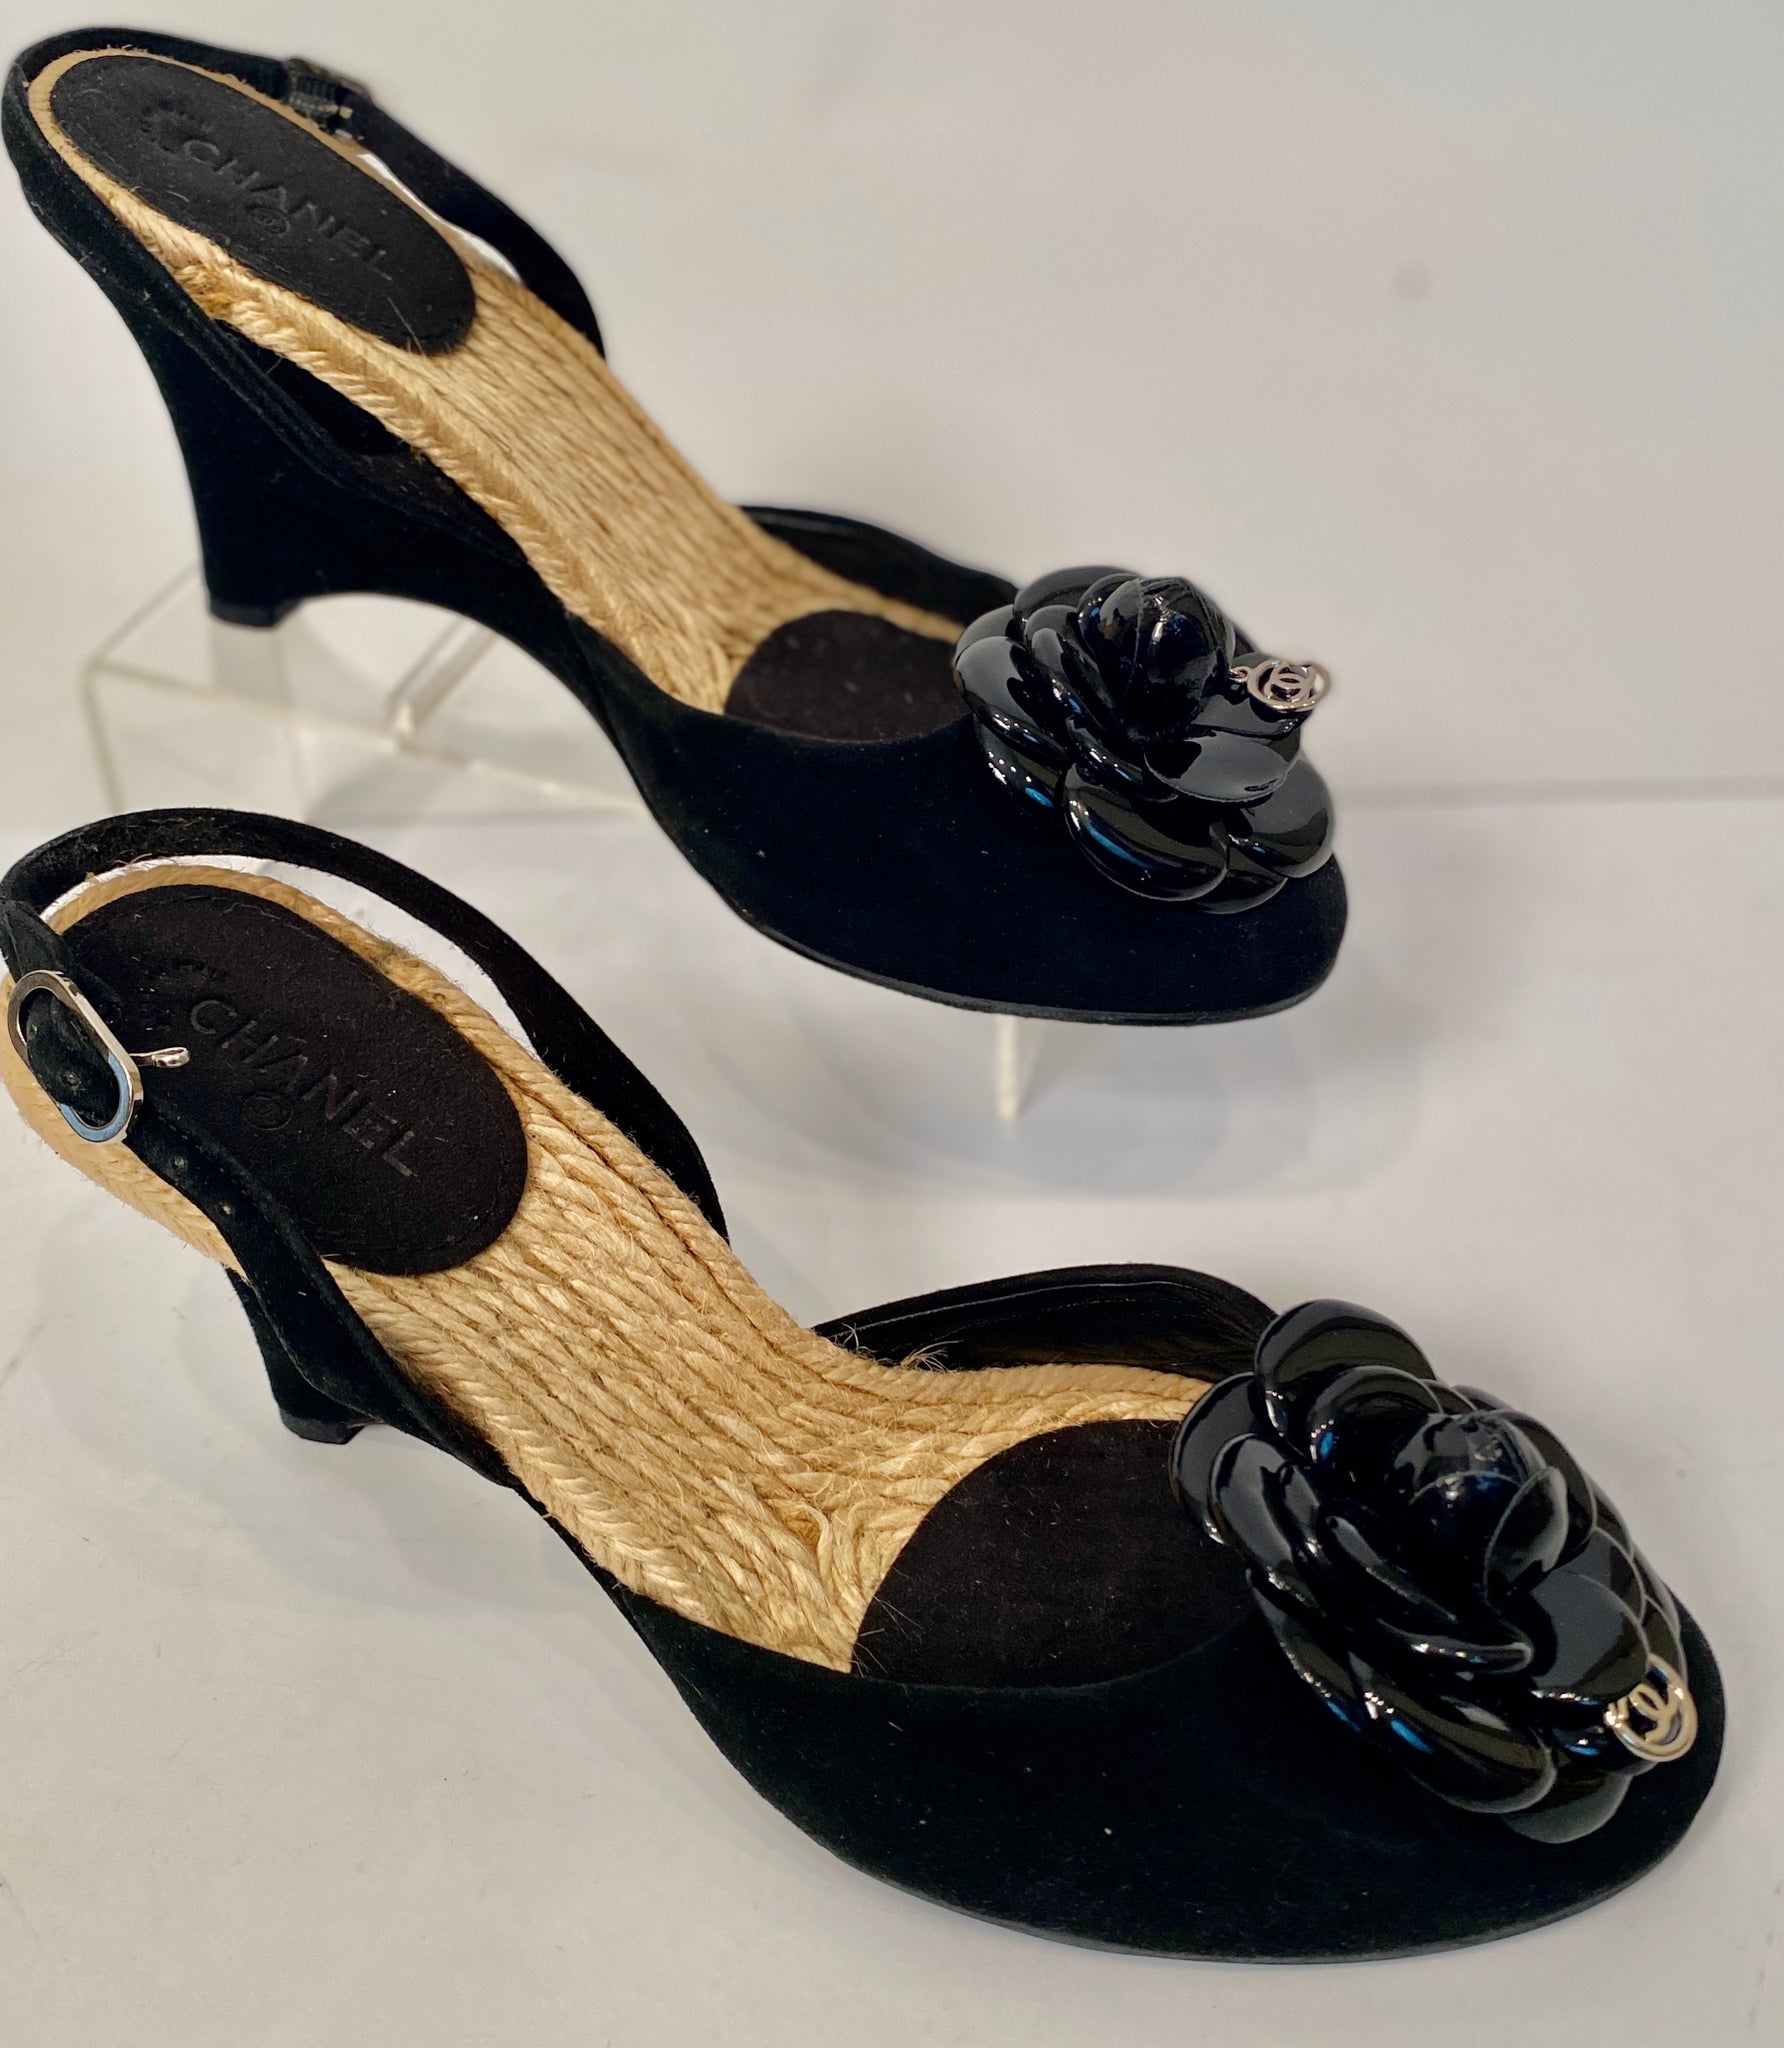 Chanel Camellia Flowers Embossed Black Leather Slip On Open Toe Heels Shoes  38